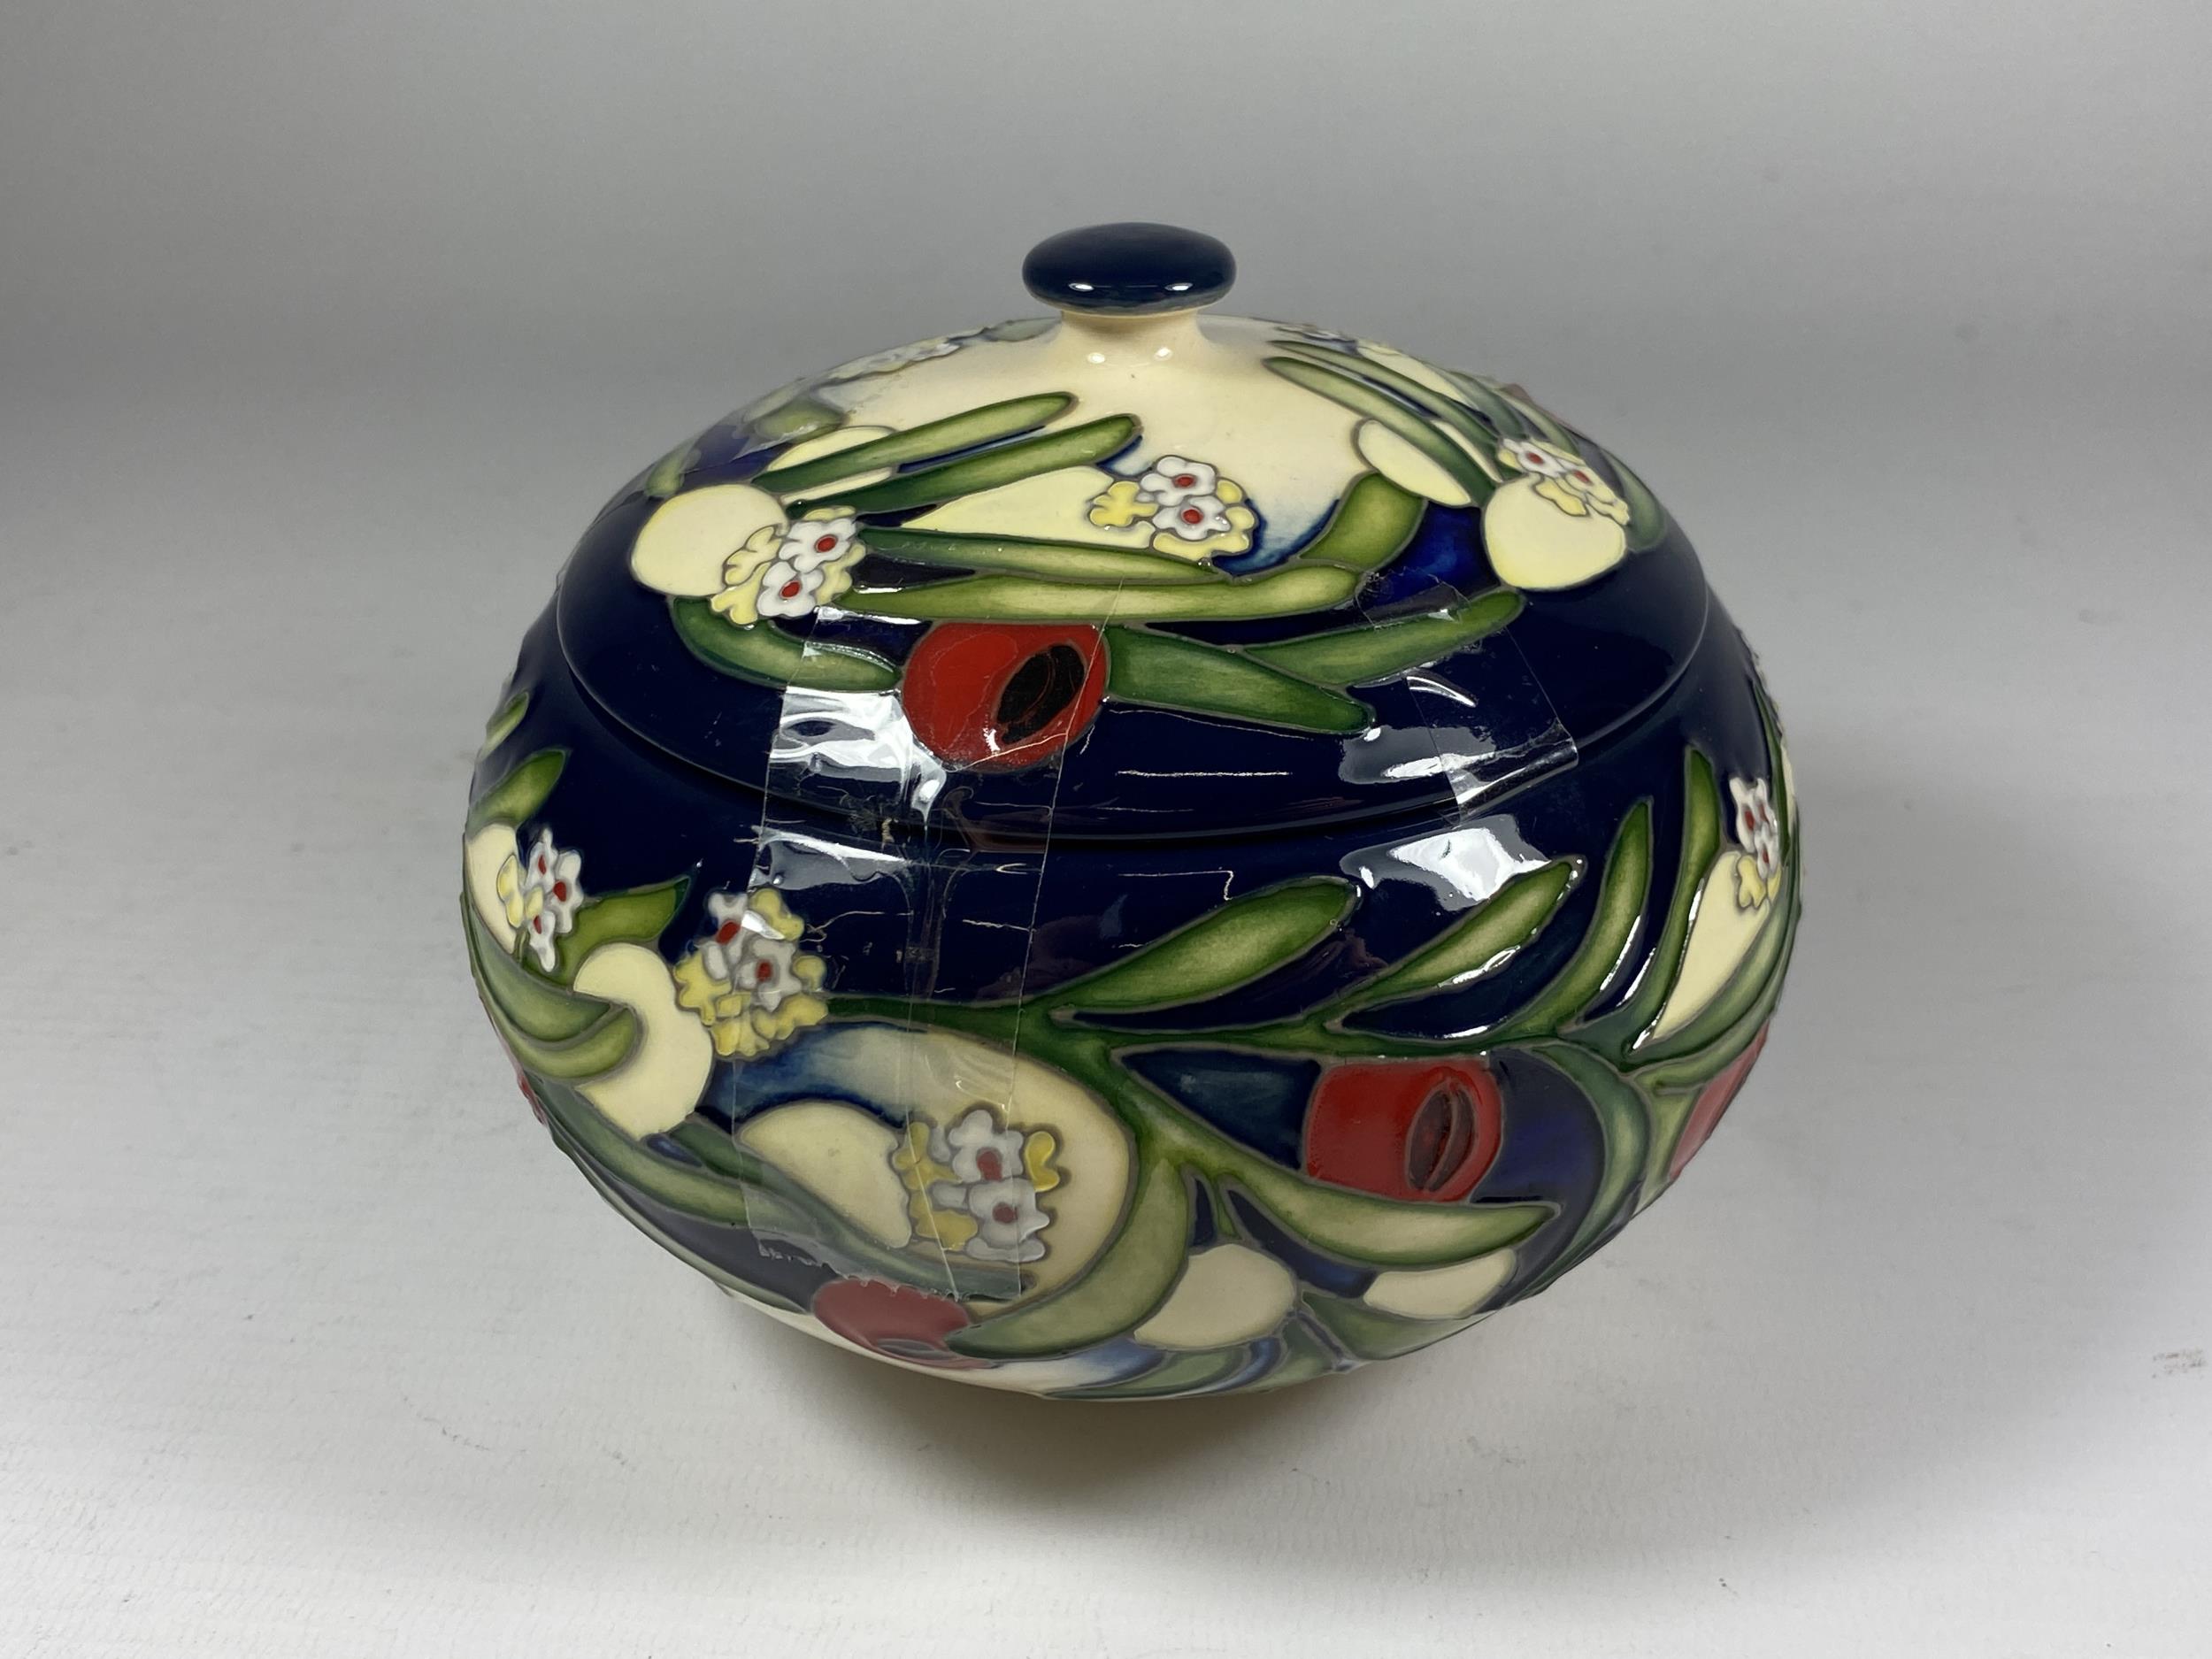 A LIMITED EDITION MOORCROFT POTTERY 'ANKERWYCKE YEW' PATTERN LIDDED VASE, NO. 27/40, R.R.P £545 - Image 2 of 3